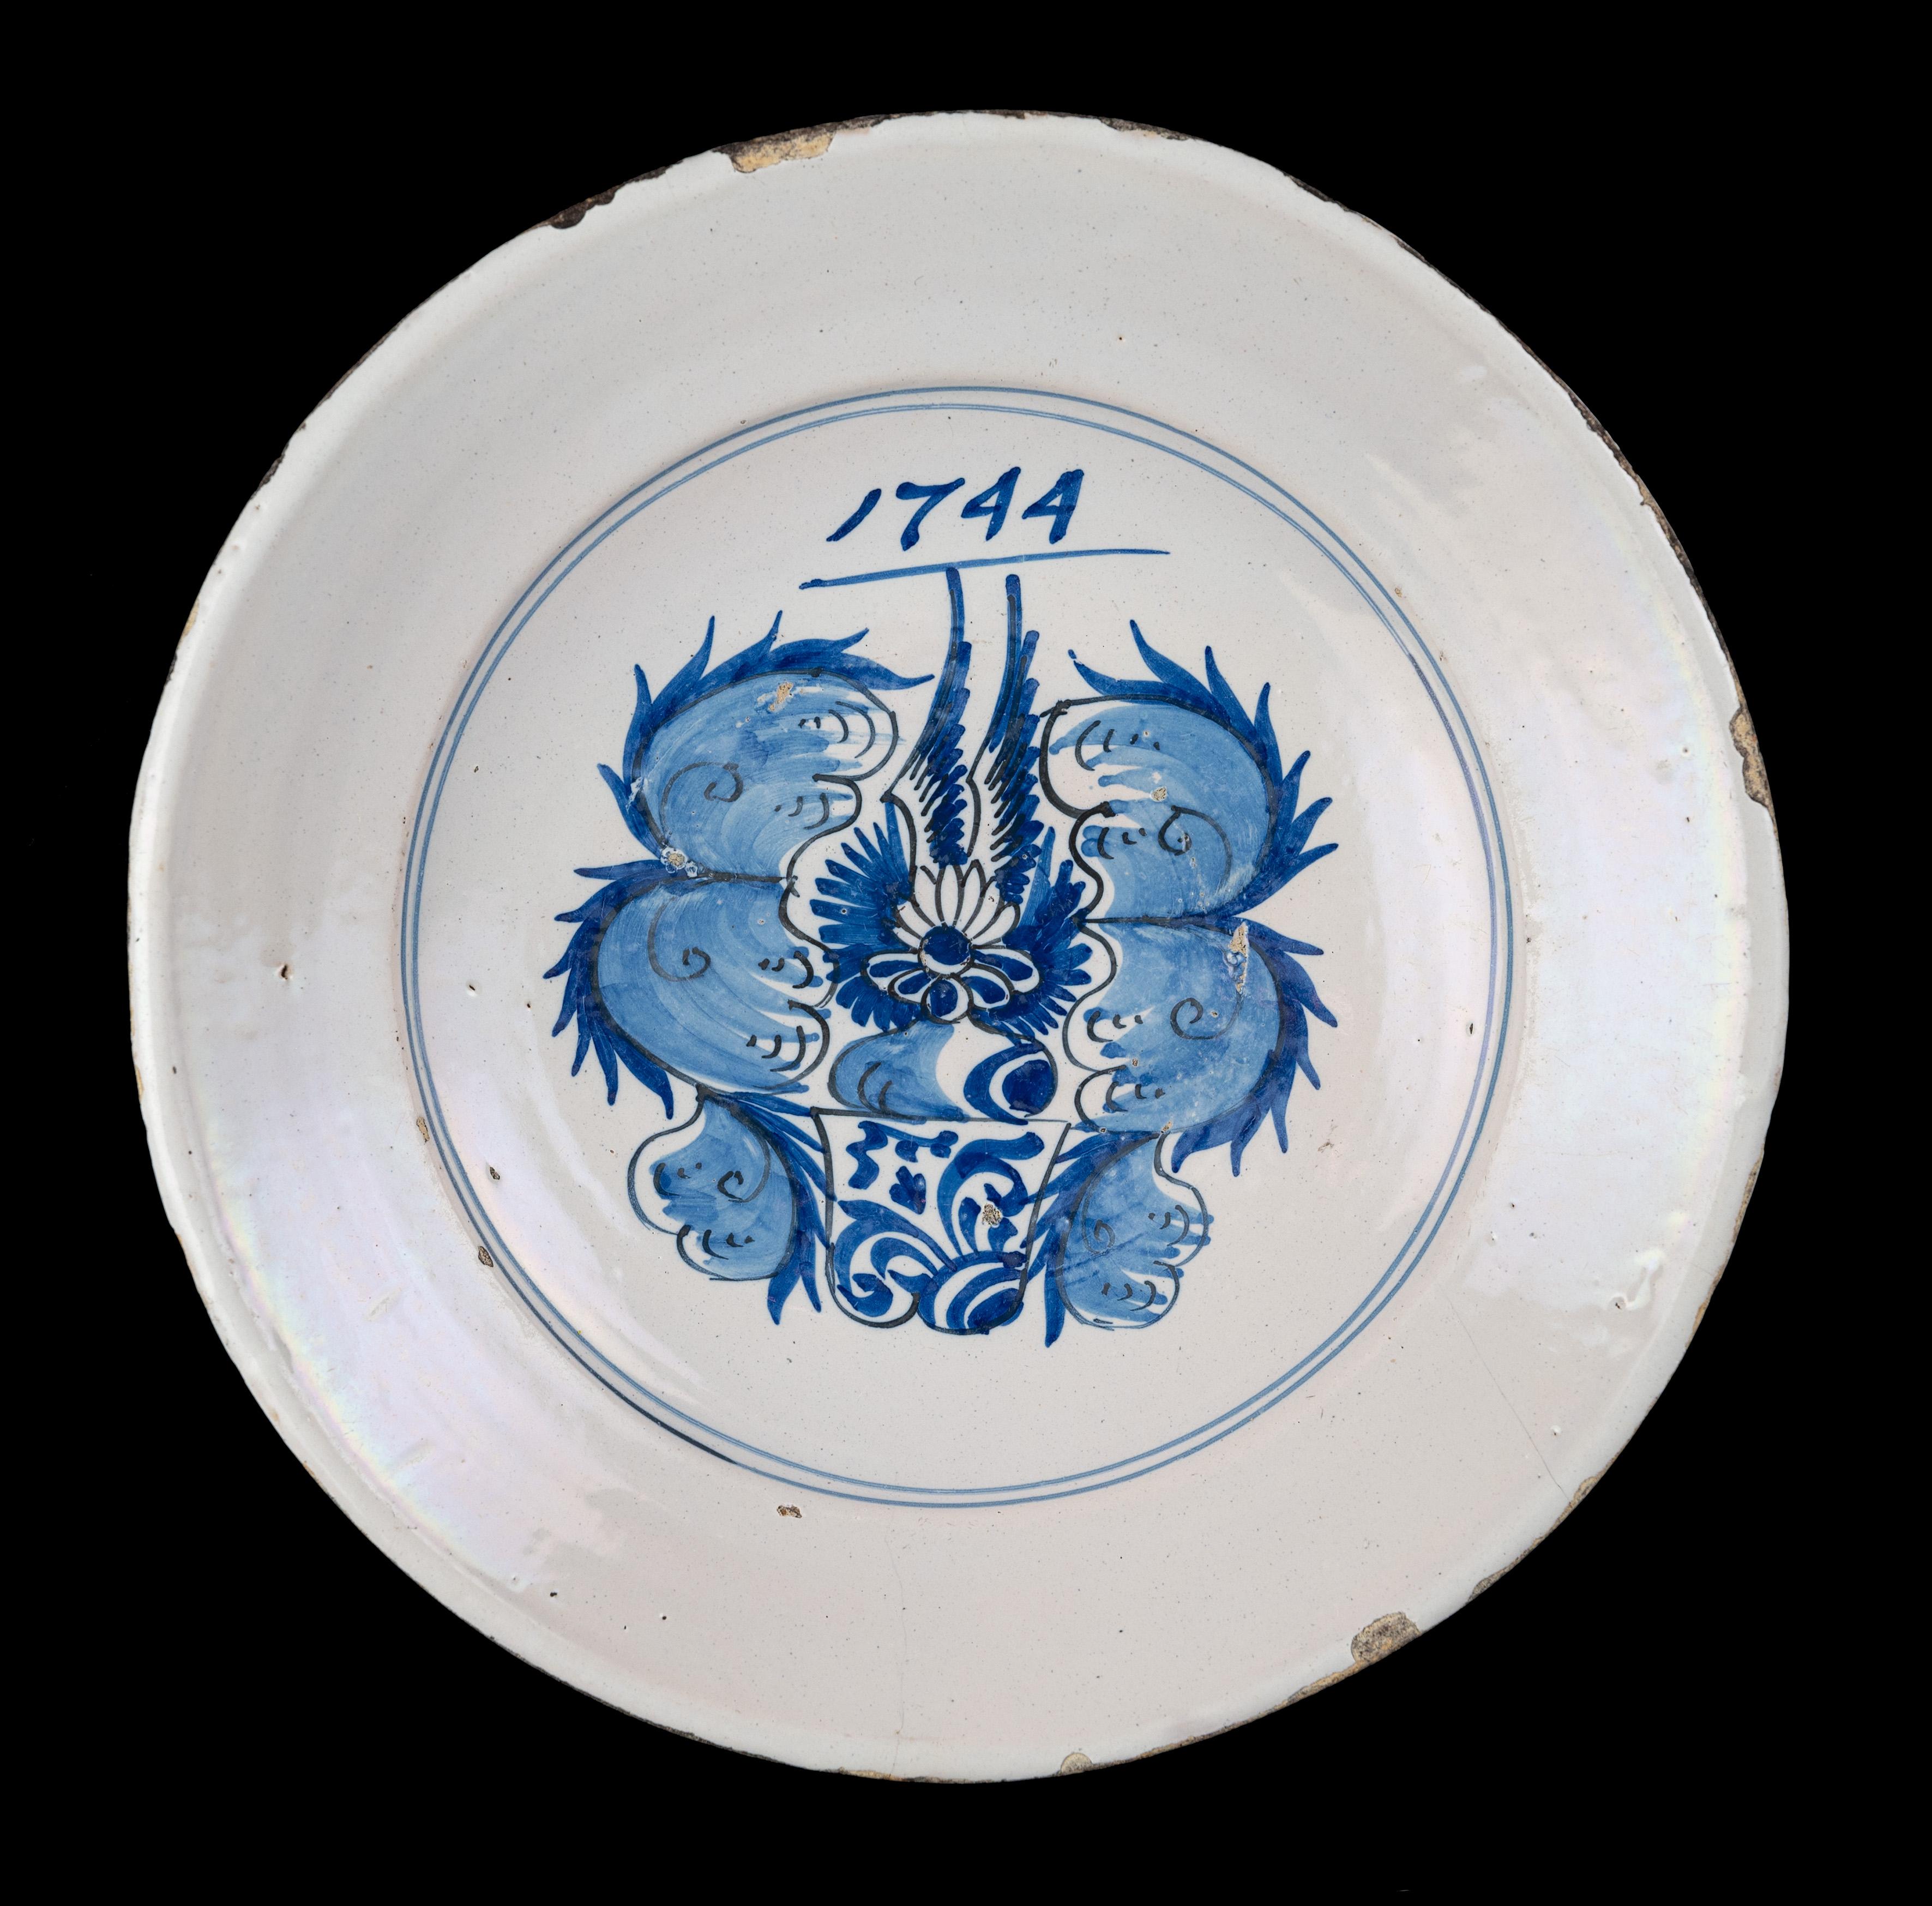 Blue and white armorial dish. Harlingen, dated 1744

The dish has a wide raised flange and is painted in blue with a coat of arms and the year 1744. The depiction is framed within a double circle, the flange is unpainted. Three stilt marks, which